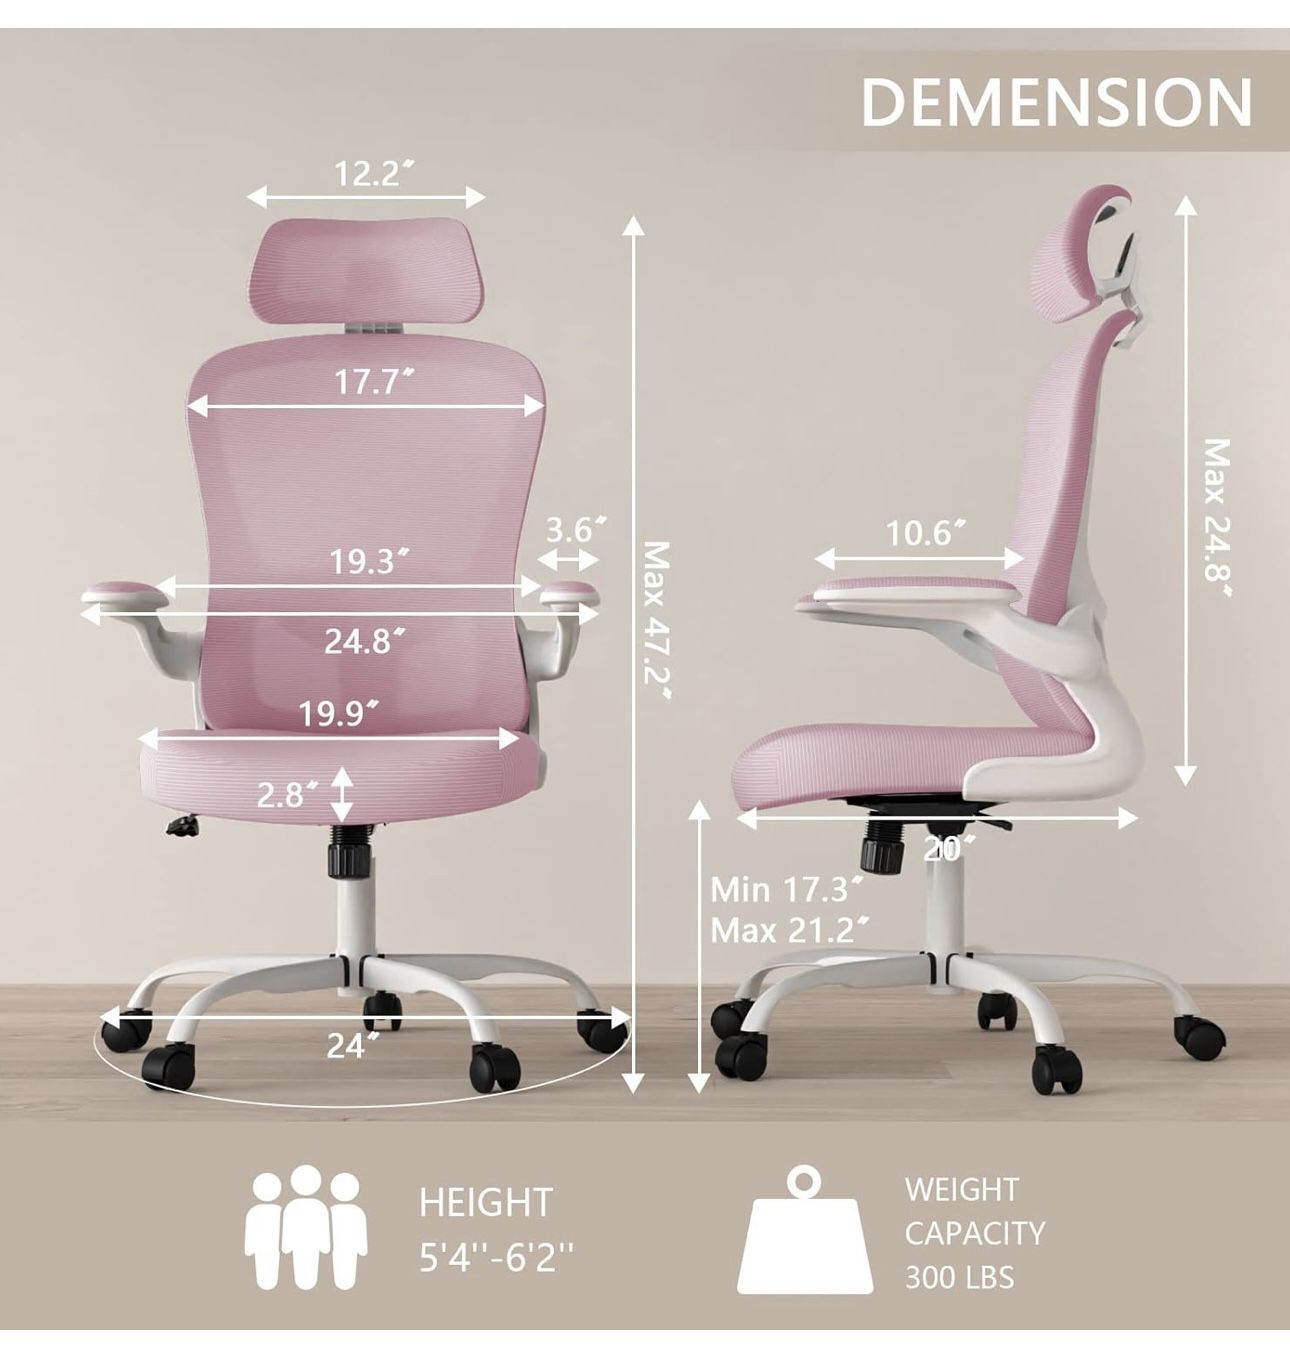 Was 190$ Office Chair, High Back Ergonomic Desk Chair, Breathable Mesh Desk Chair with Adjustable Lumbar Support and Headrest, Swivel with flip-up A